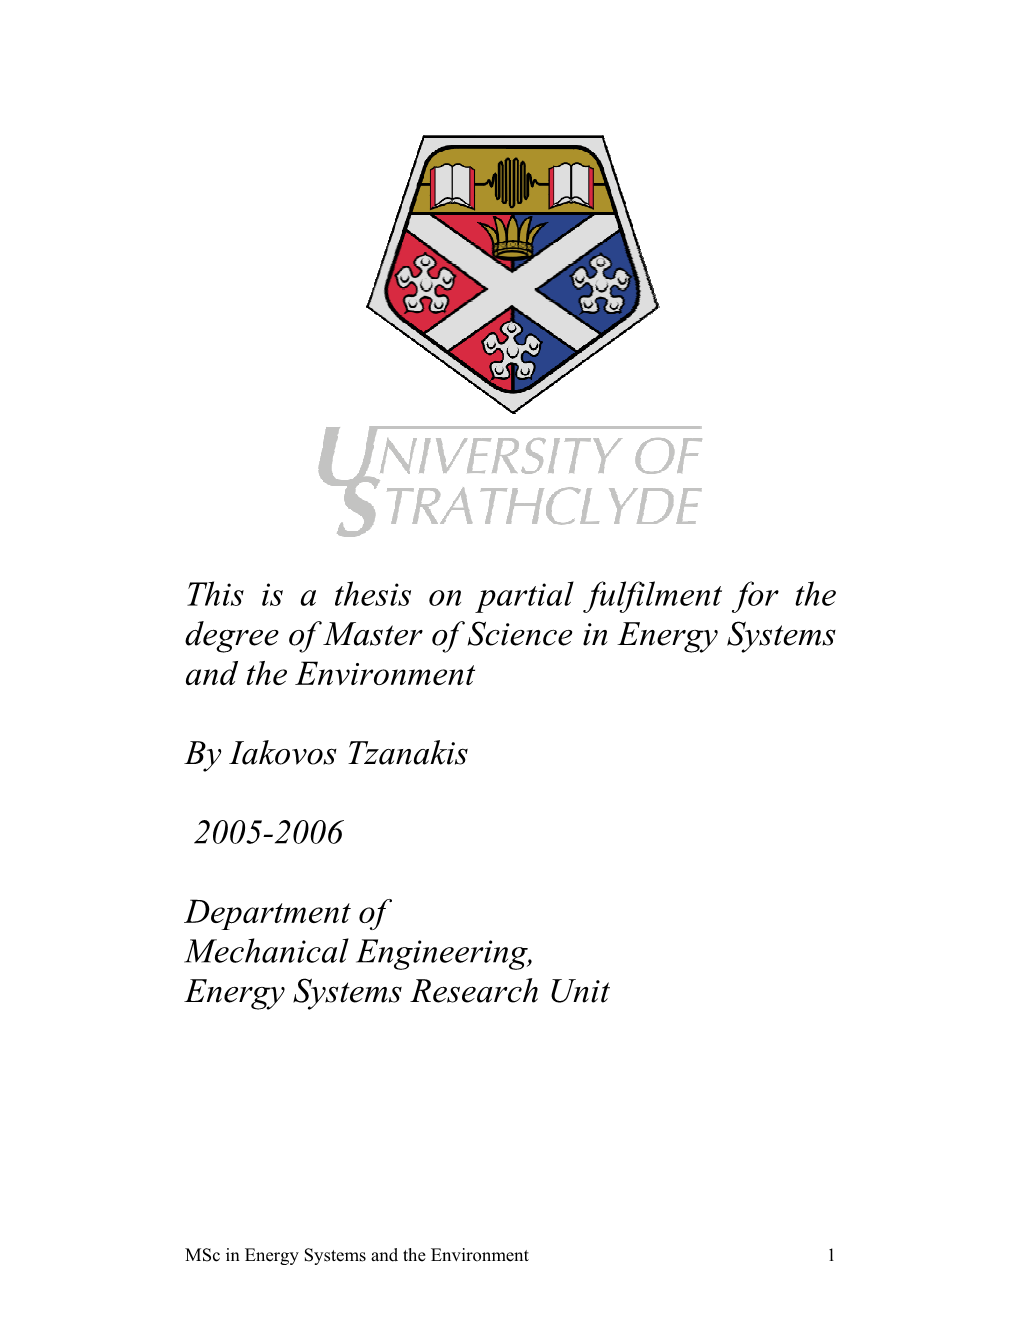 This Is a Thesis on Partial Fulfilment for the Degree of Master of Science in Energy Systems and the Environment